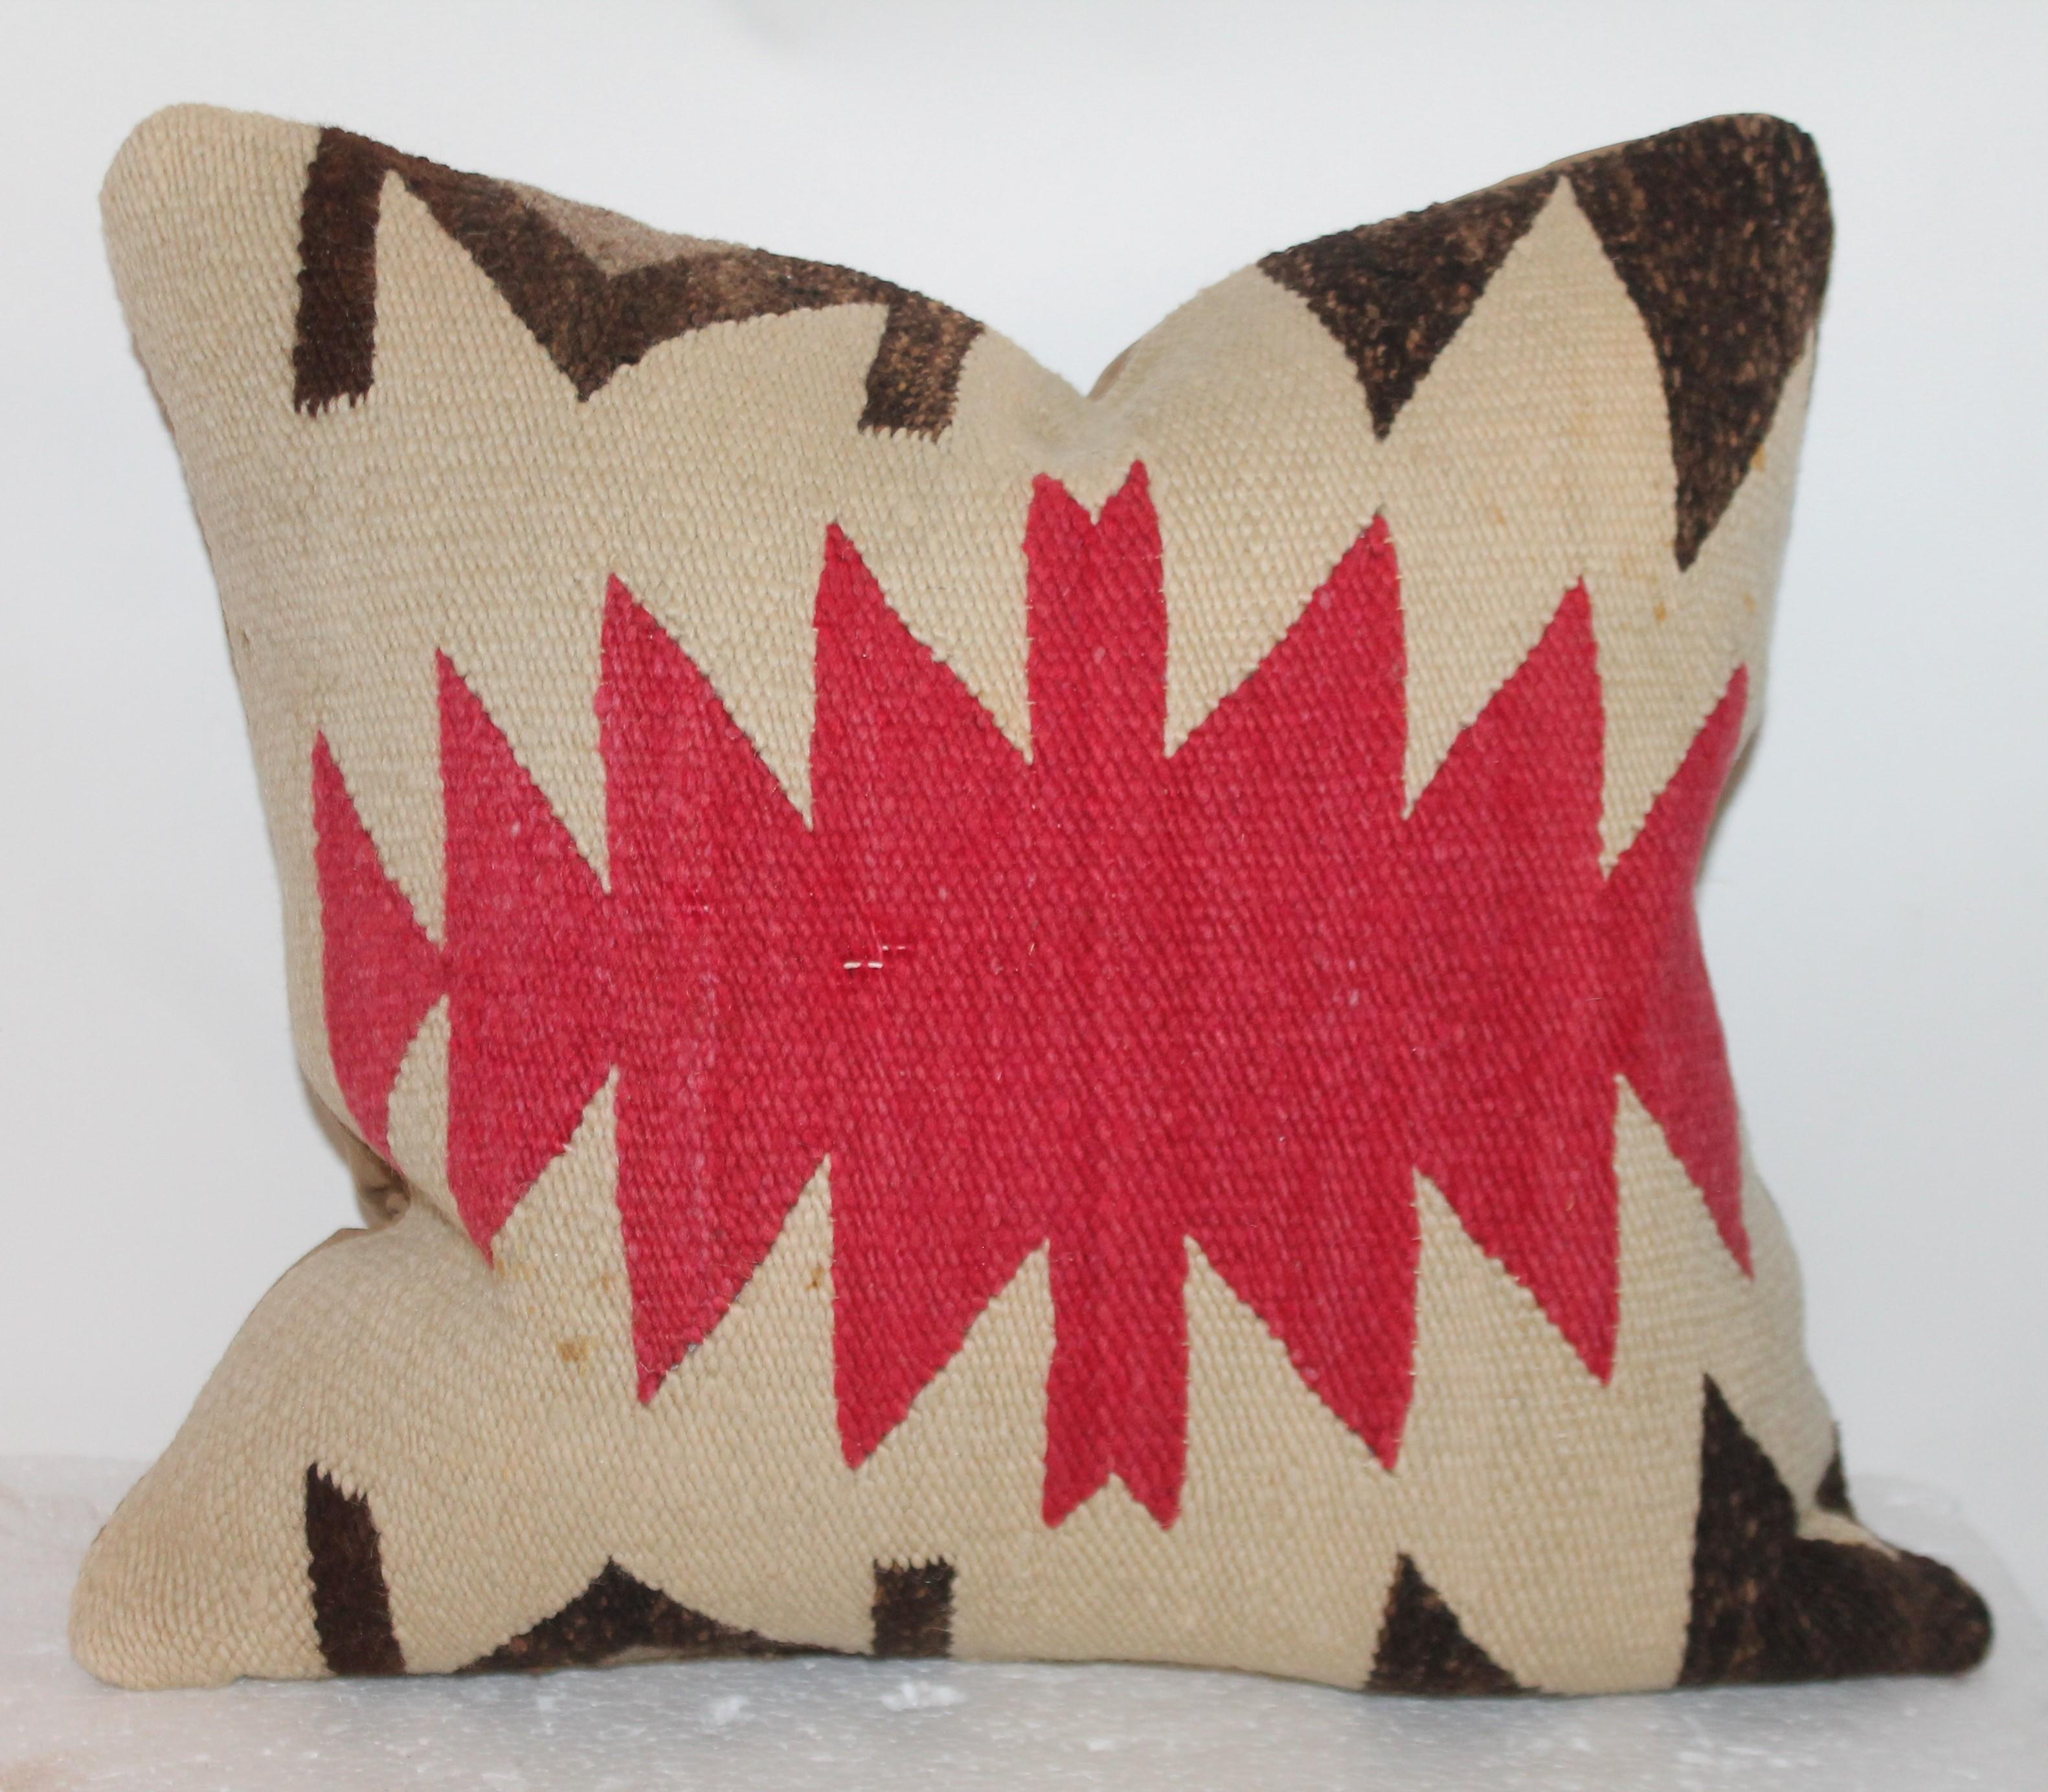 These Indian weaving pillows have tan suede backings and in fine condition. Fantastic style and colors. Sold as a pair.